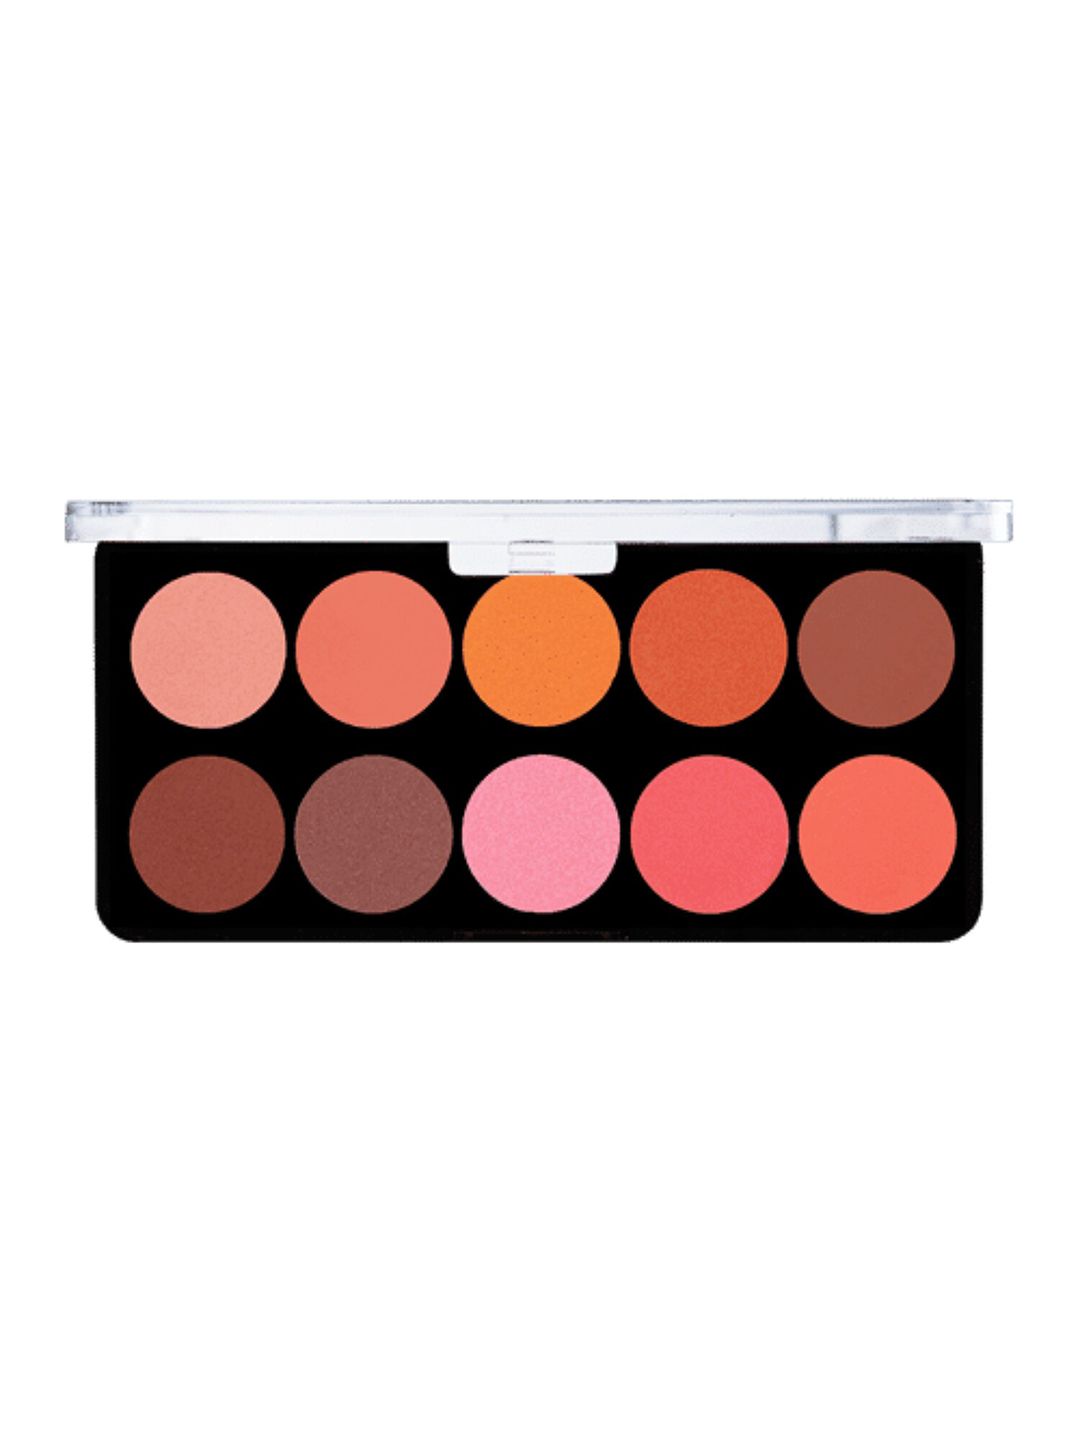 Sivanna Colors The Elegant Eyeshadow Palette - HF377 02 Price in India